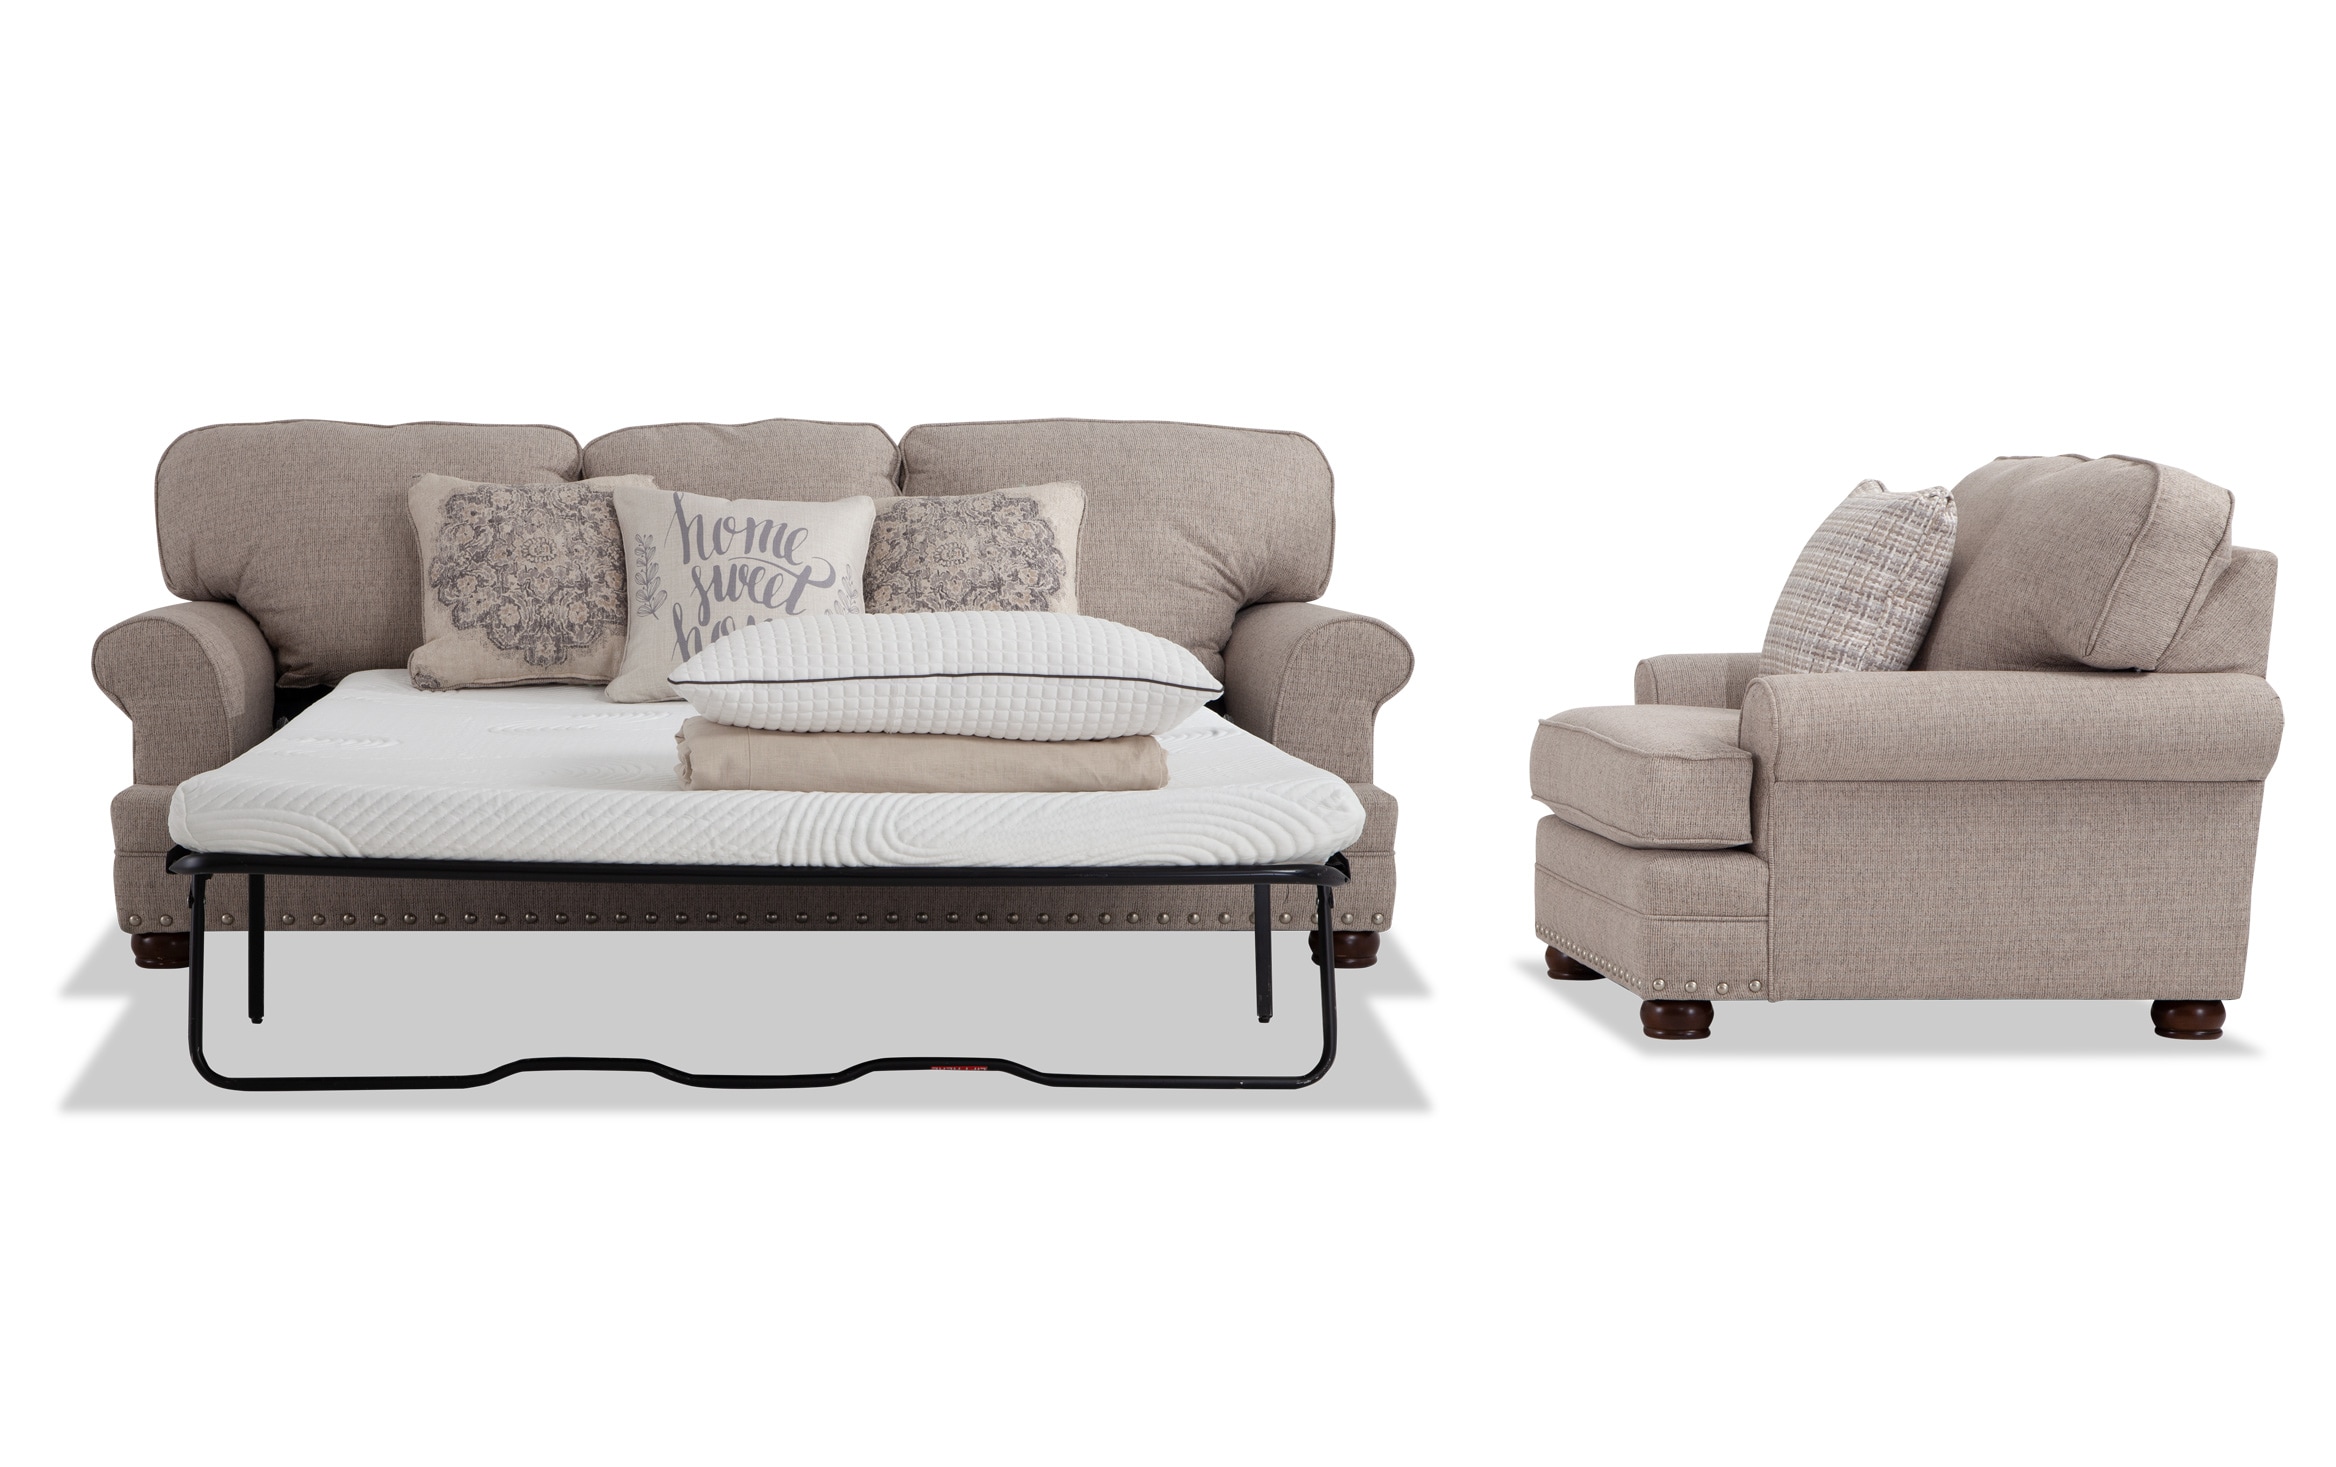 Sleeper Sofa And Chair Set Top Sellers, UP TO 50% OFF | www 